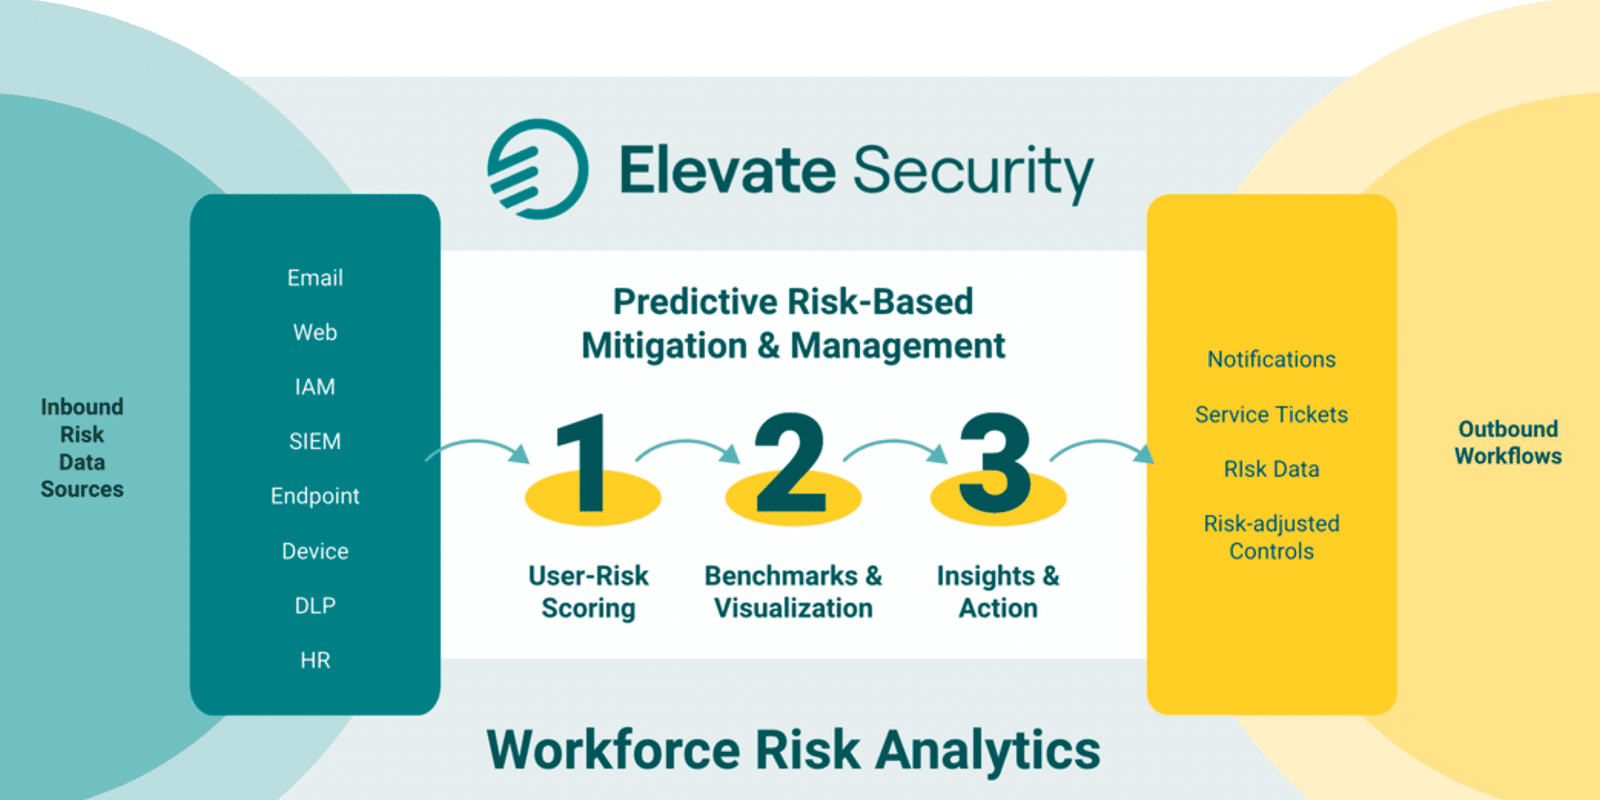 Elevate Security Risk-Based Mitigation and Management Workflow Chart